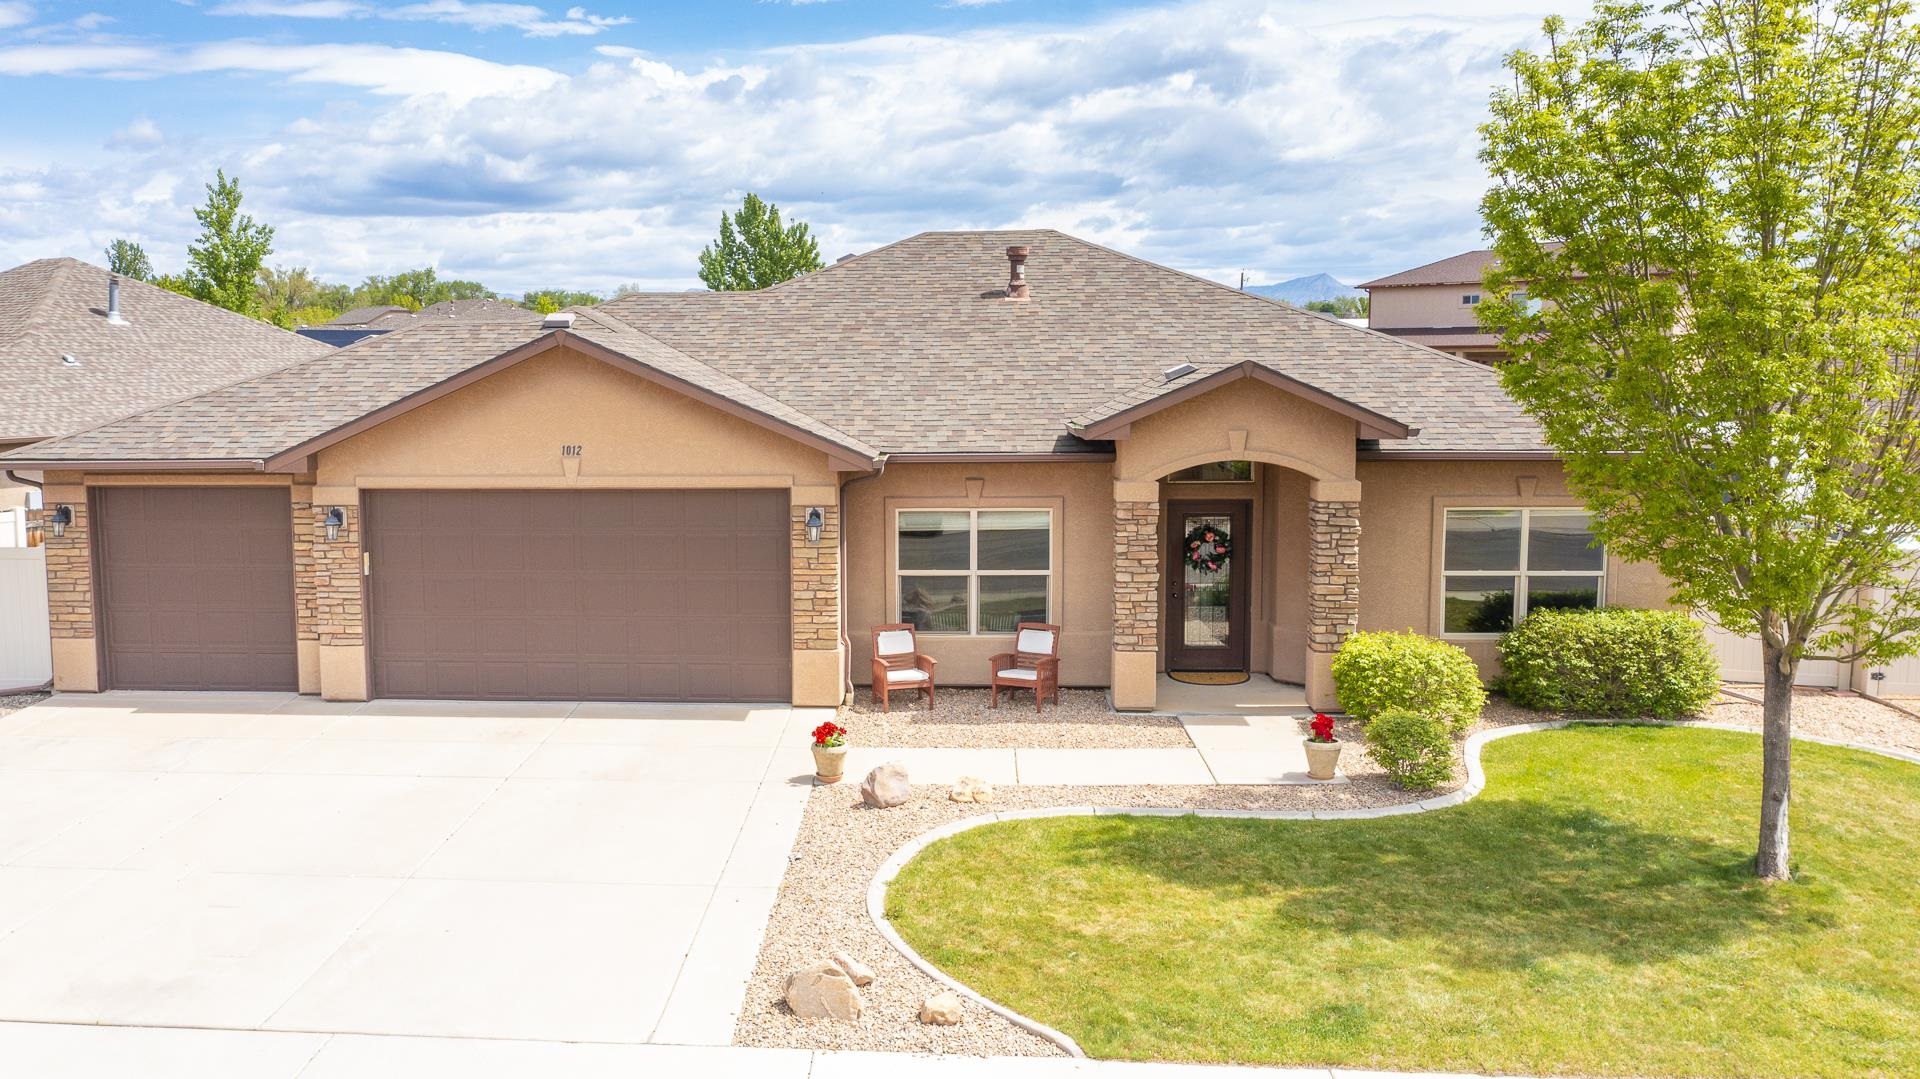 Don't miss out on this beautiful move in ready home located in sought after Echo Canyon Estates in Fruita!! This wonderful open concept home features 4 beds (one could easily be office), 2 baths, 3 car garage & just over 1800 sq ft of living space. Split bedroom design w/ updated flooring, vaulted ceilings, roomy kitchen w/ large pantry, a/c for hot days & updated furnace for chilly nights! Enjoy the covered patio & easy access to community open space & neighborhood park. RV Parking, fully fenced & landscaped yard are waiting for you!!